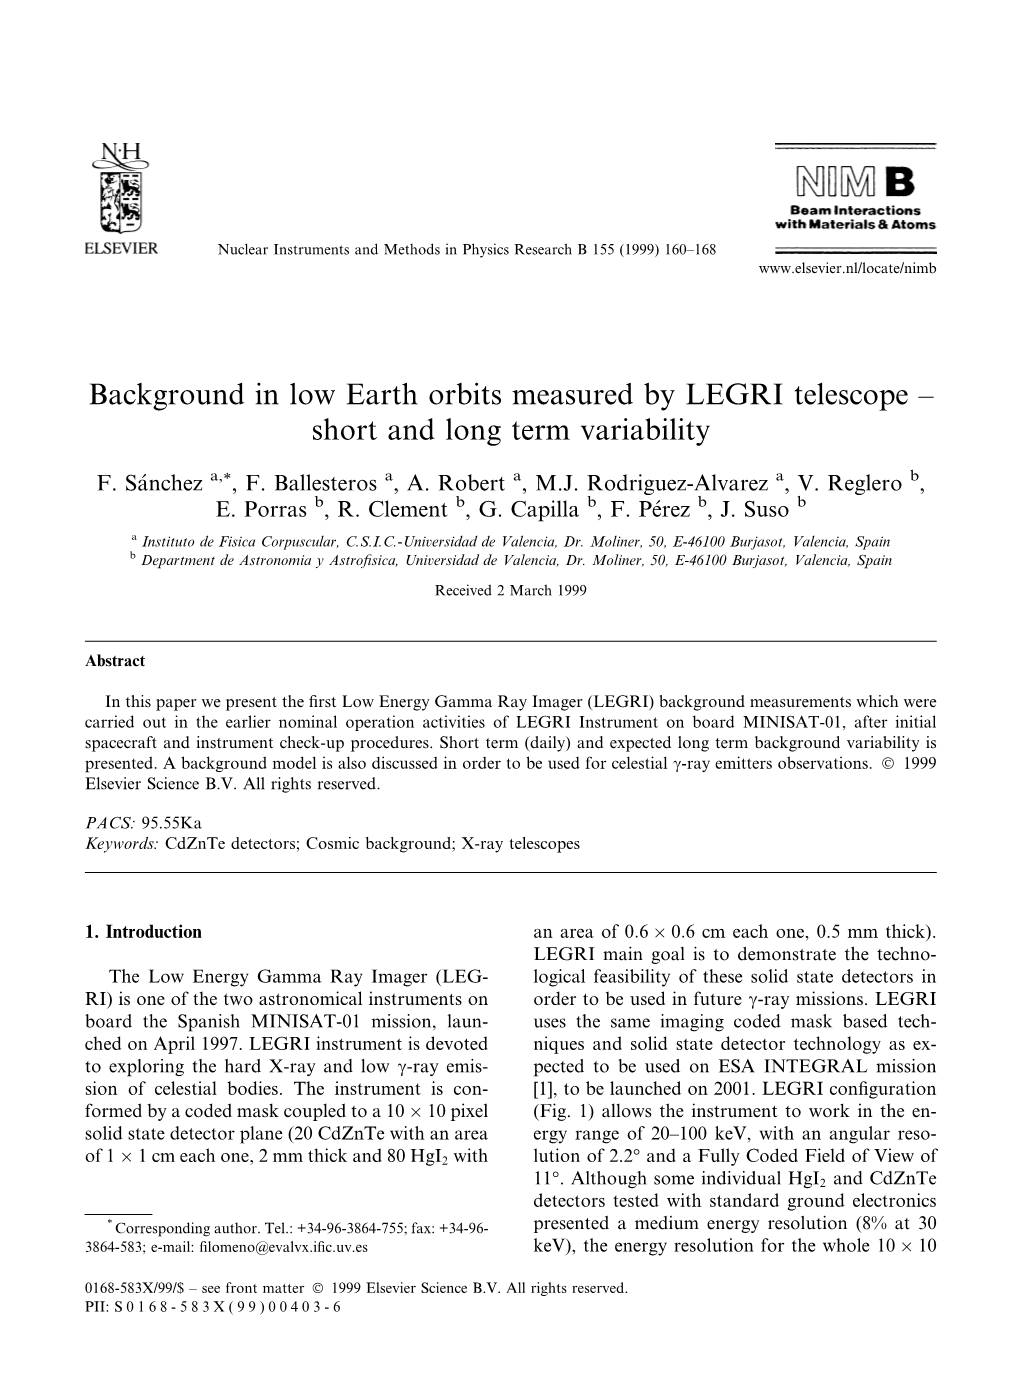 Background in Low Earth Orbits Measured by LEGRI Telescope ± Short and Long Term Variability